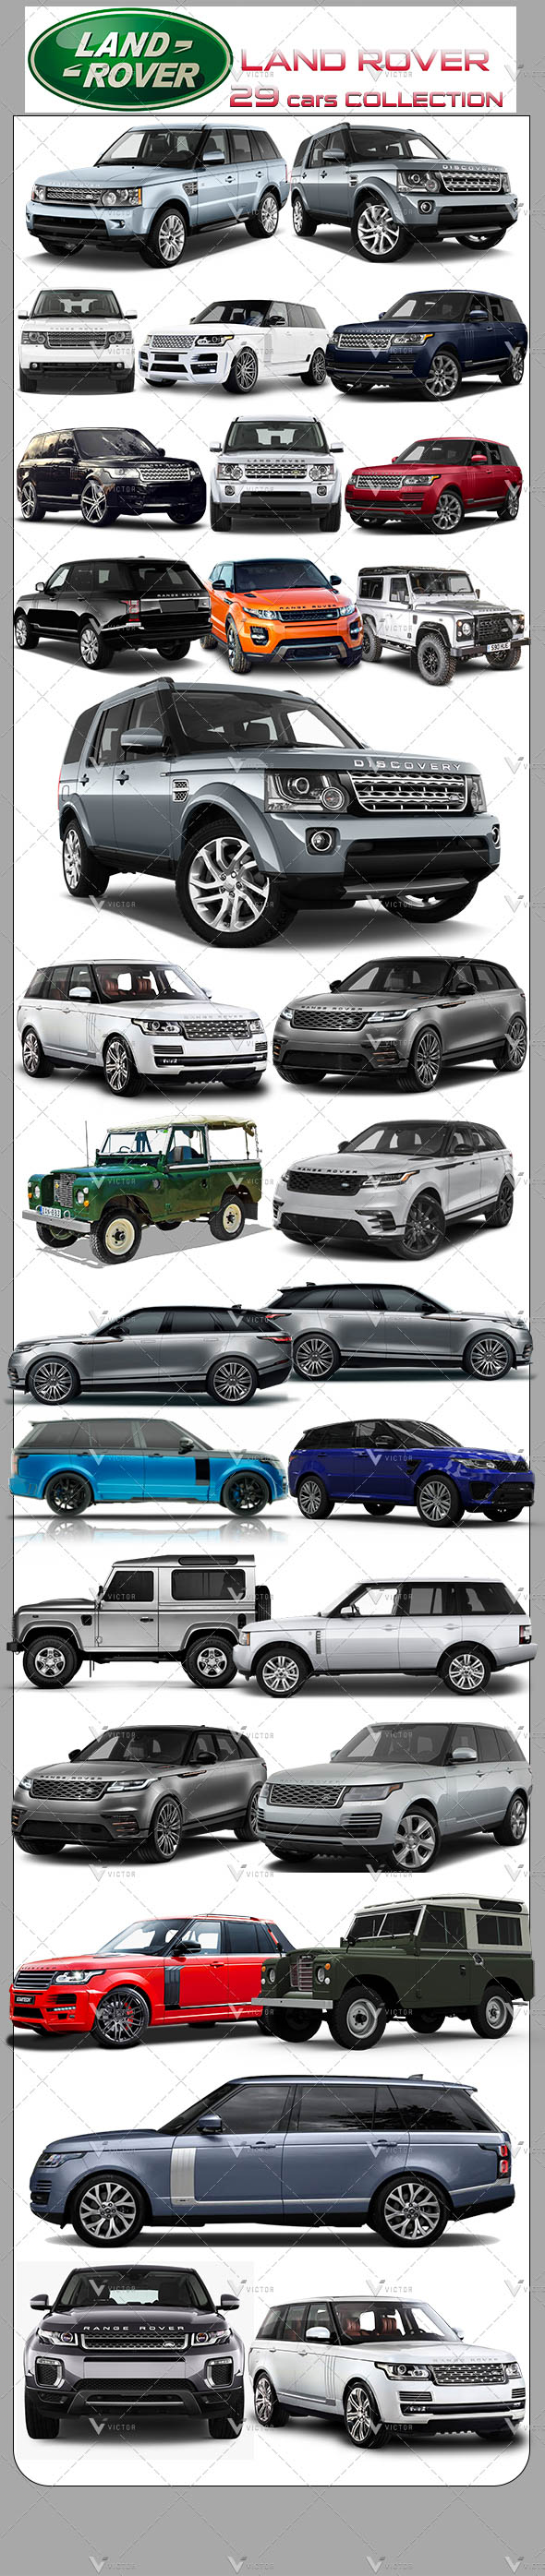 29" Land Rover/Land Cruiser/Range Rover Vehicles Models Collection Pack